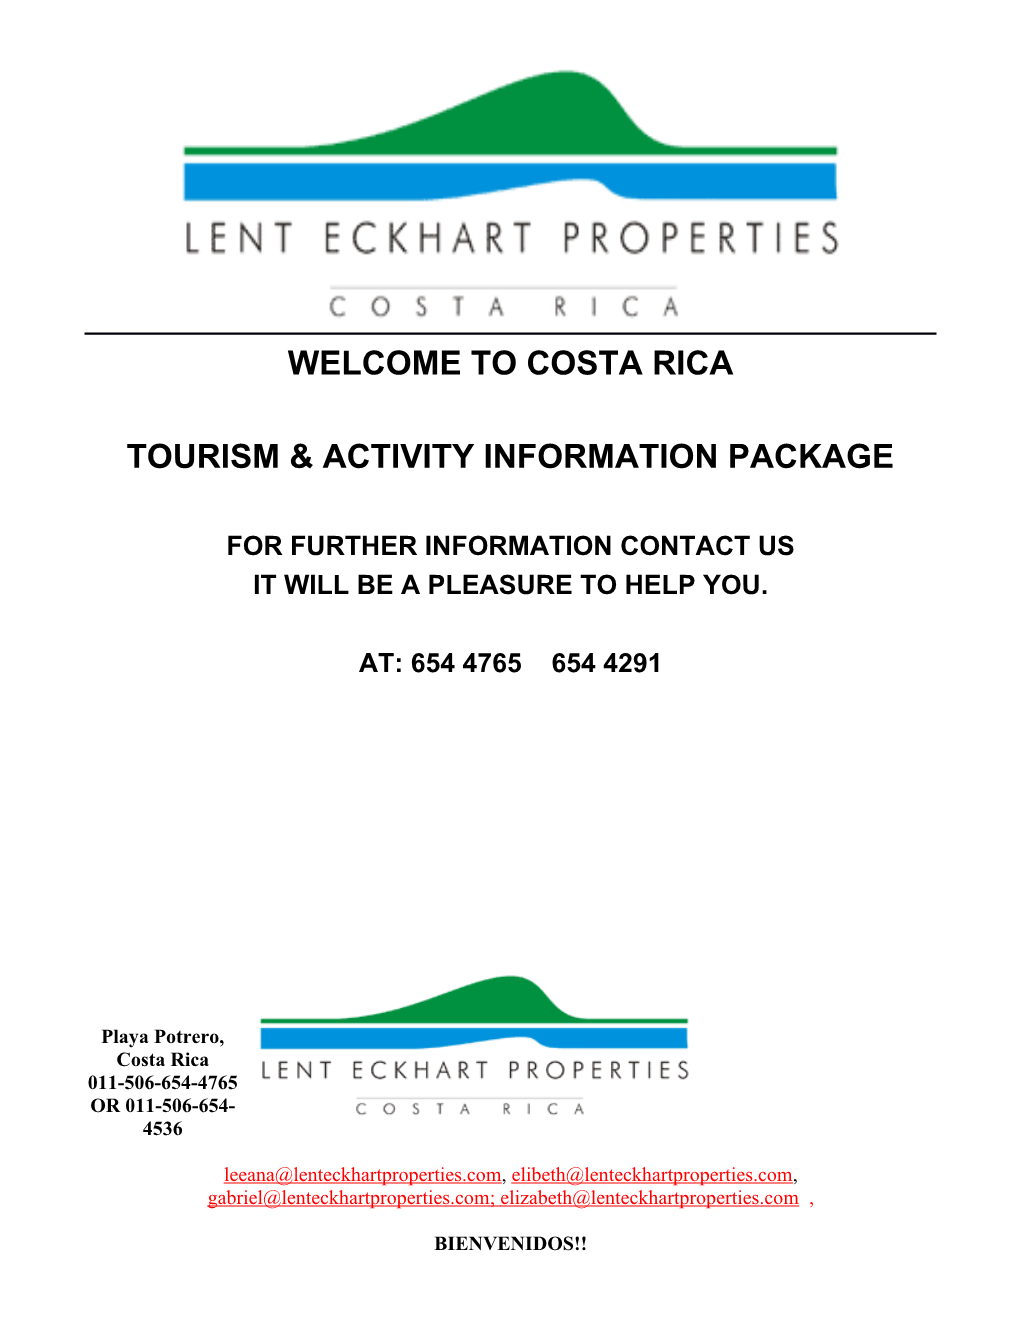 Tourism & Activity Information Package